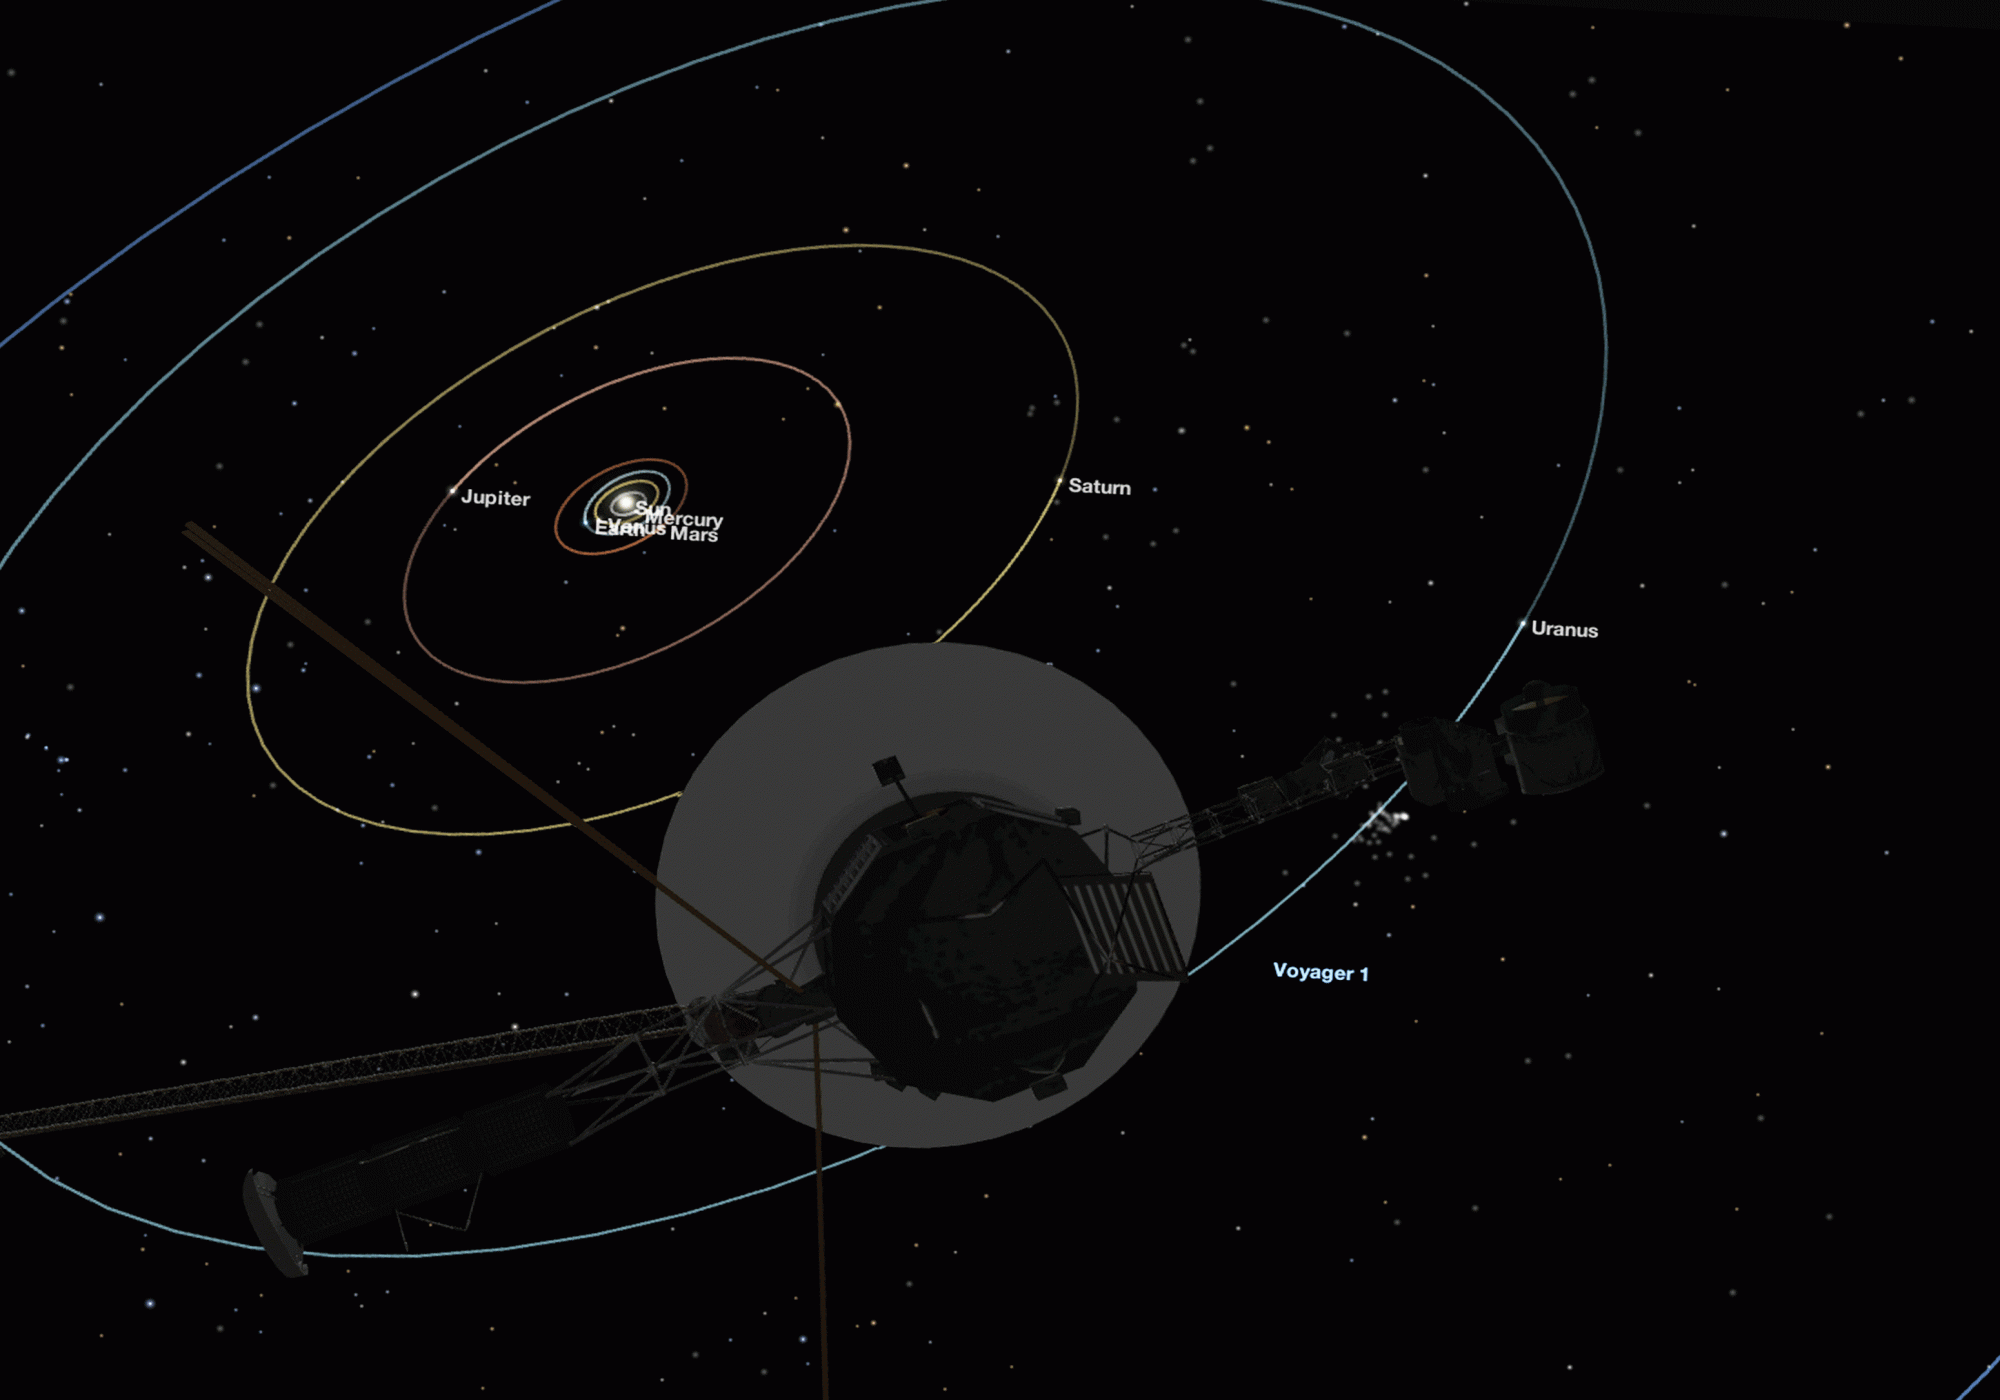 Animated GIF showing the family portrait image from the perspective of Voyager 1 in 1990.